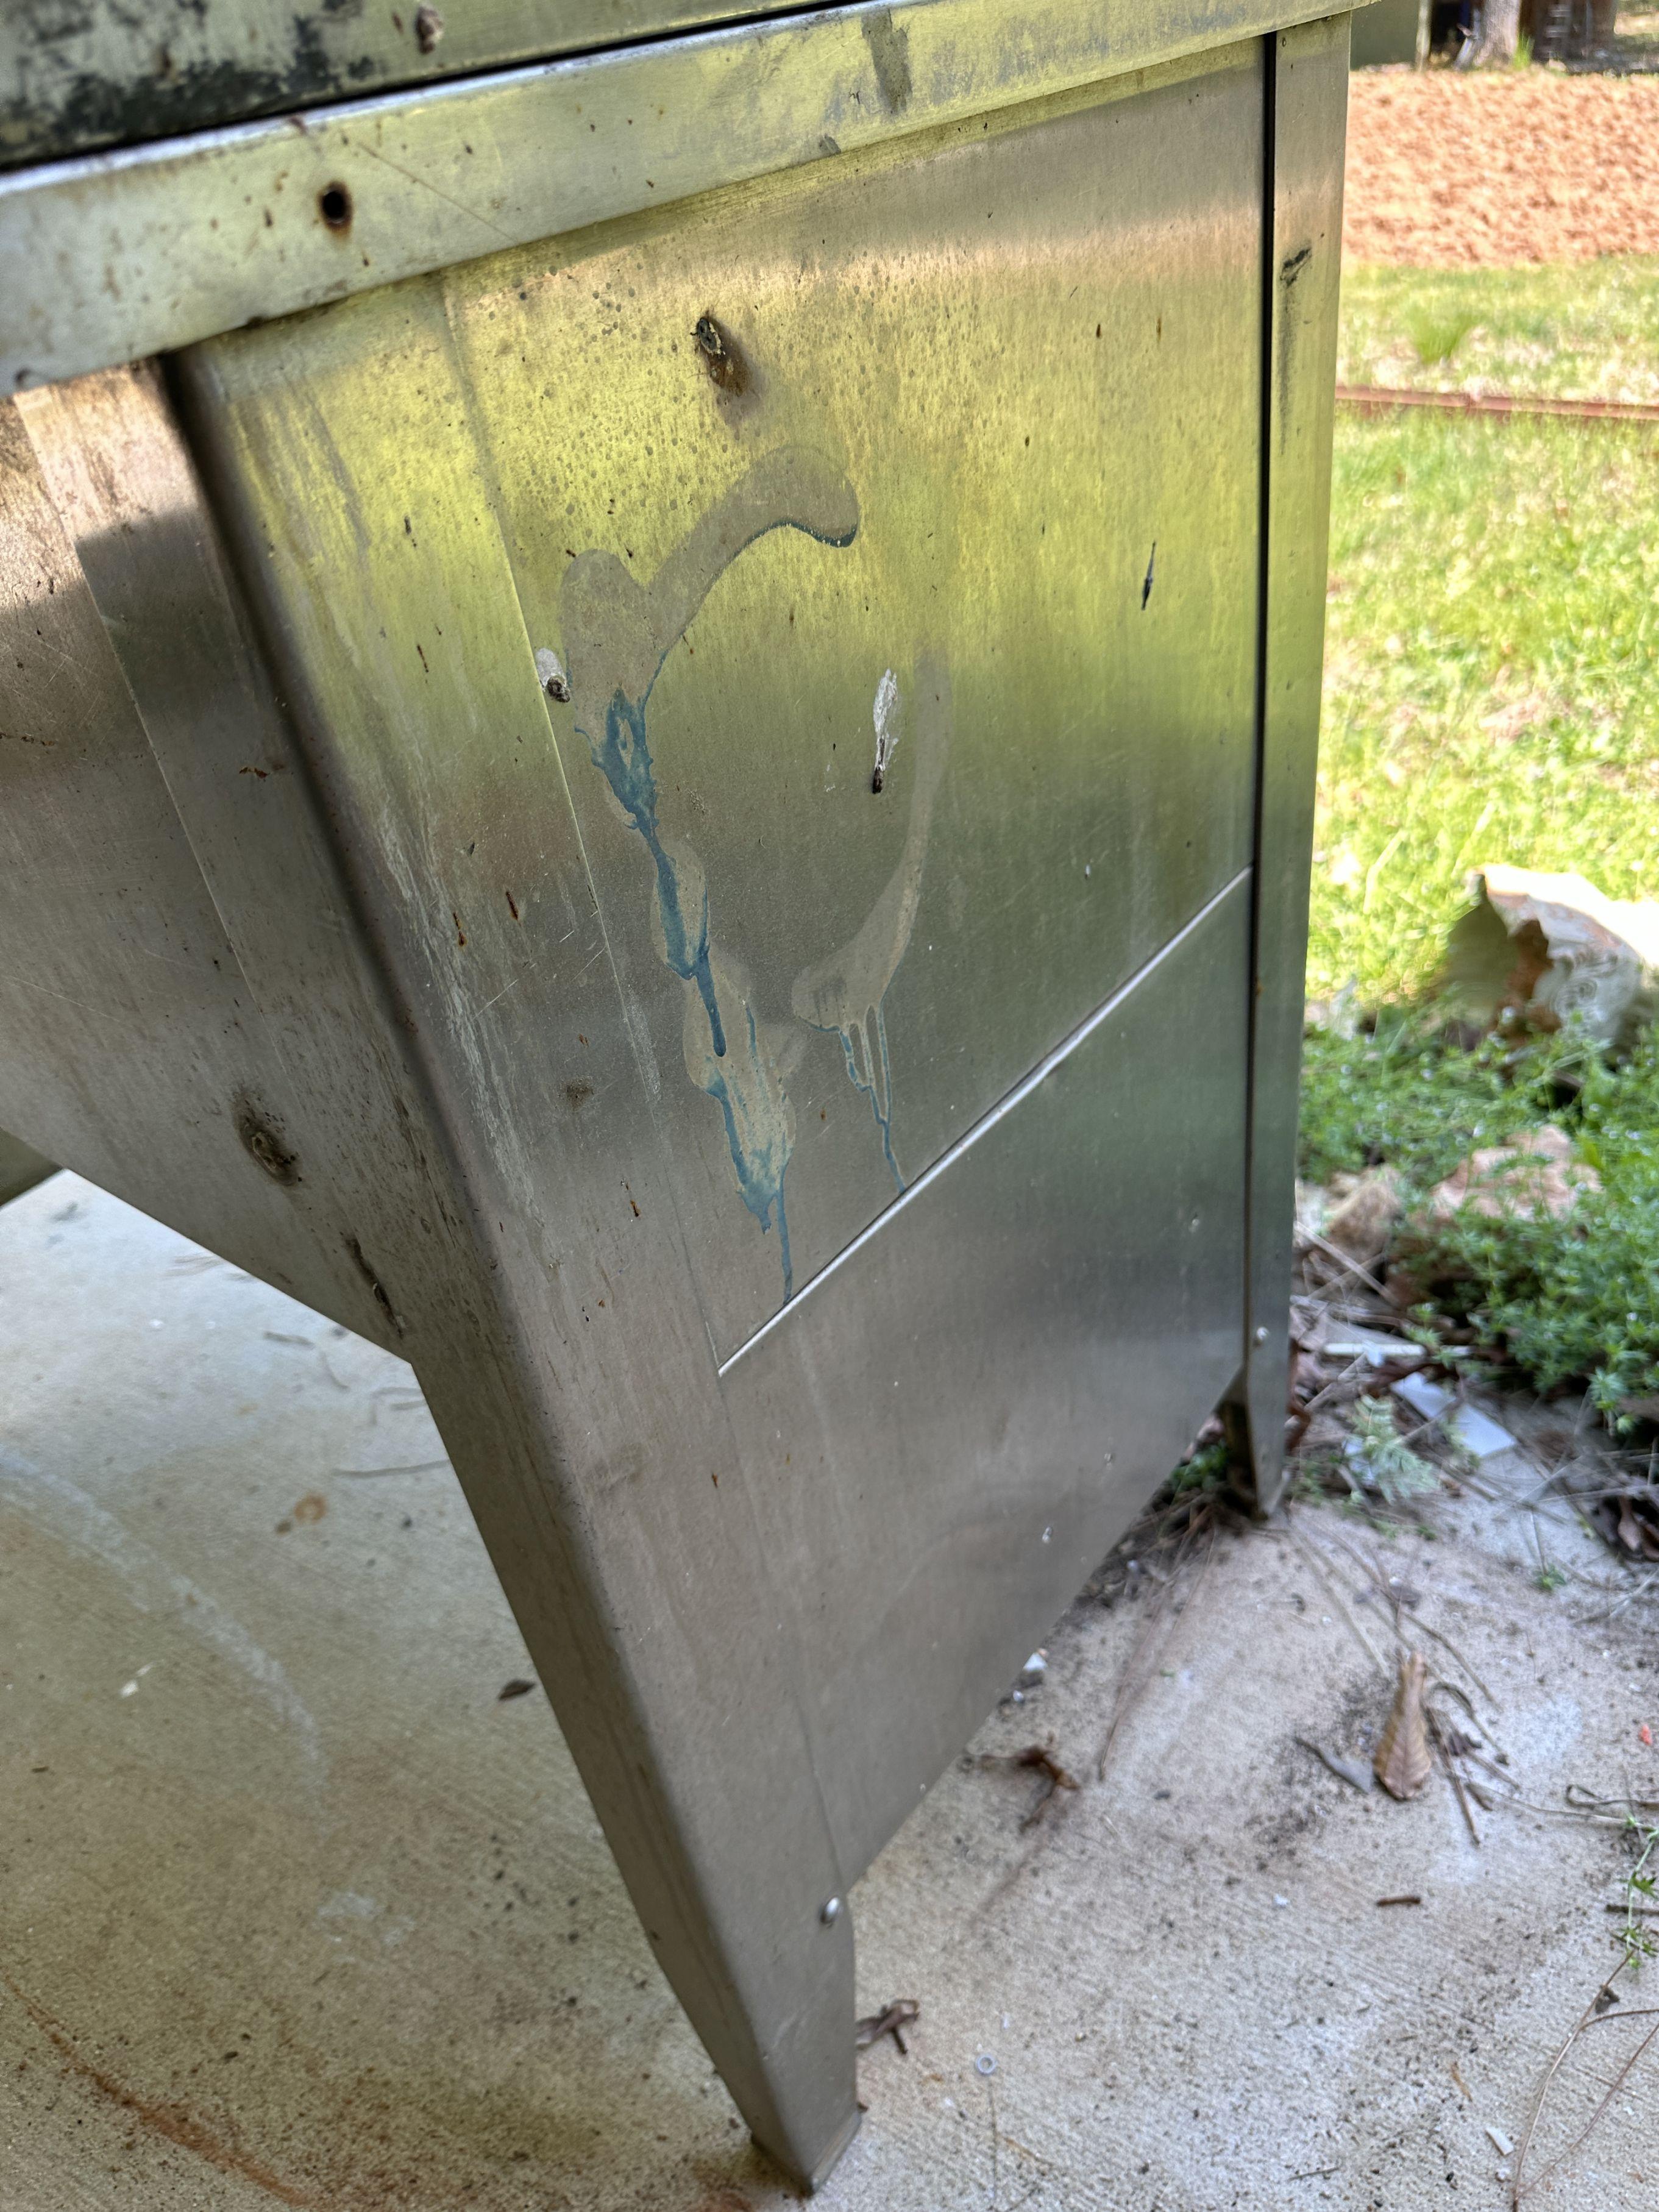 Heavy Duty Stainless Steel Work Table (Local Pick Up Only)